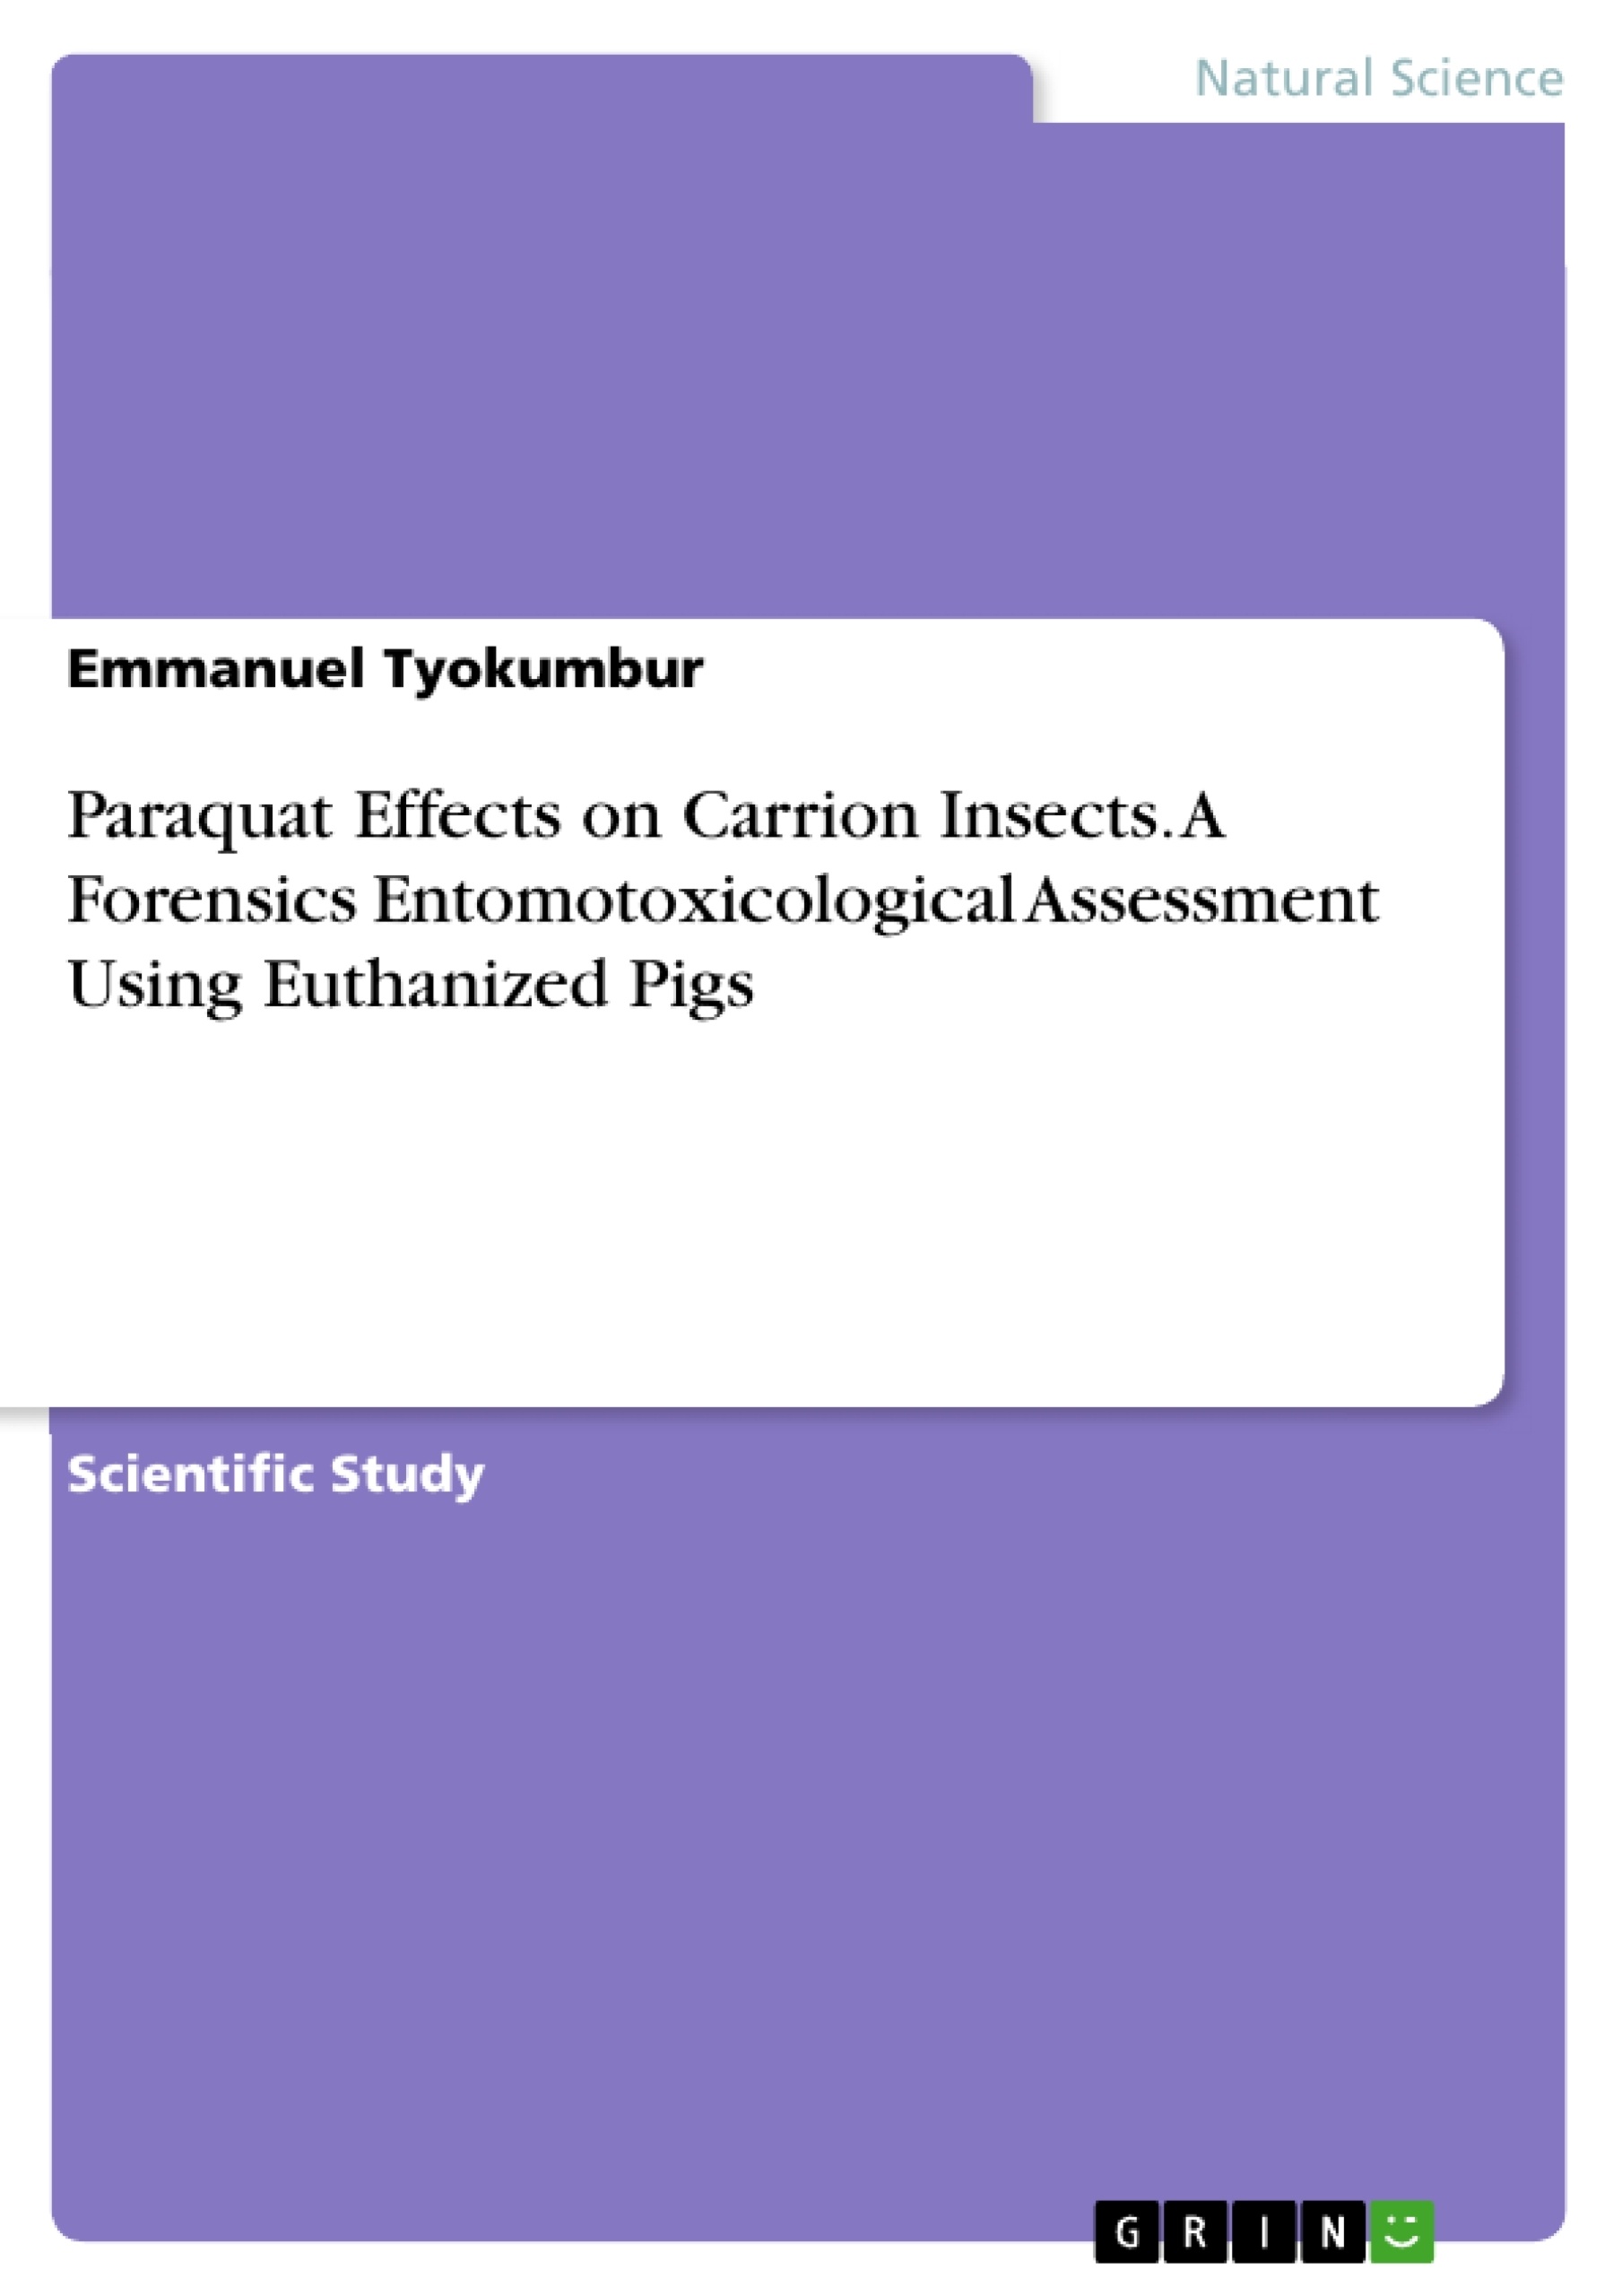 Title: Paraquat Effects on Carrion Insects. A Forensics Entomotoxicological Assessment Using Euthanized Pigs